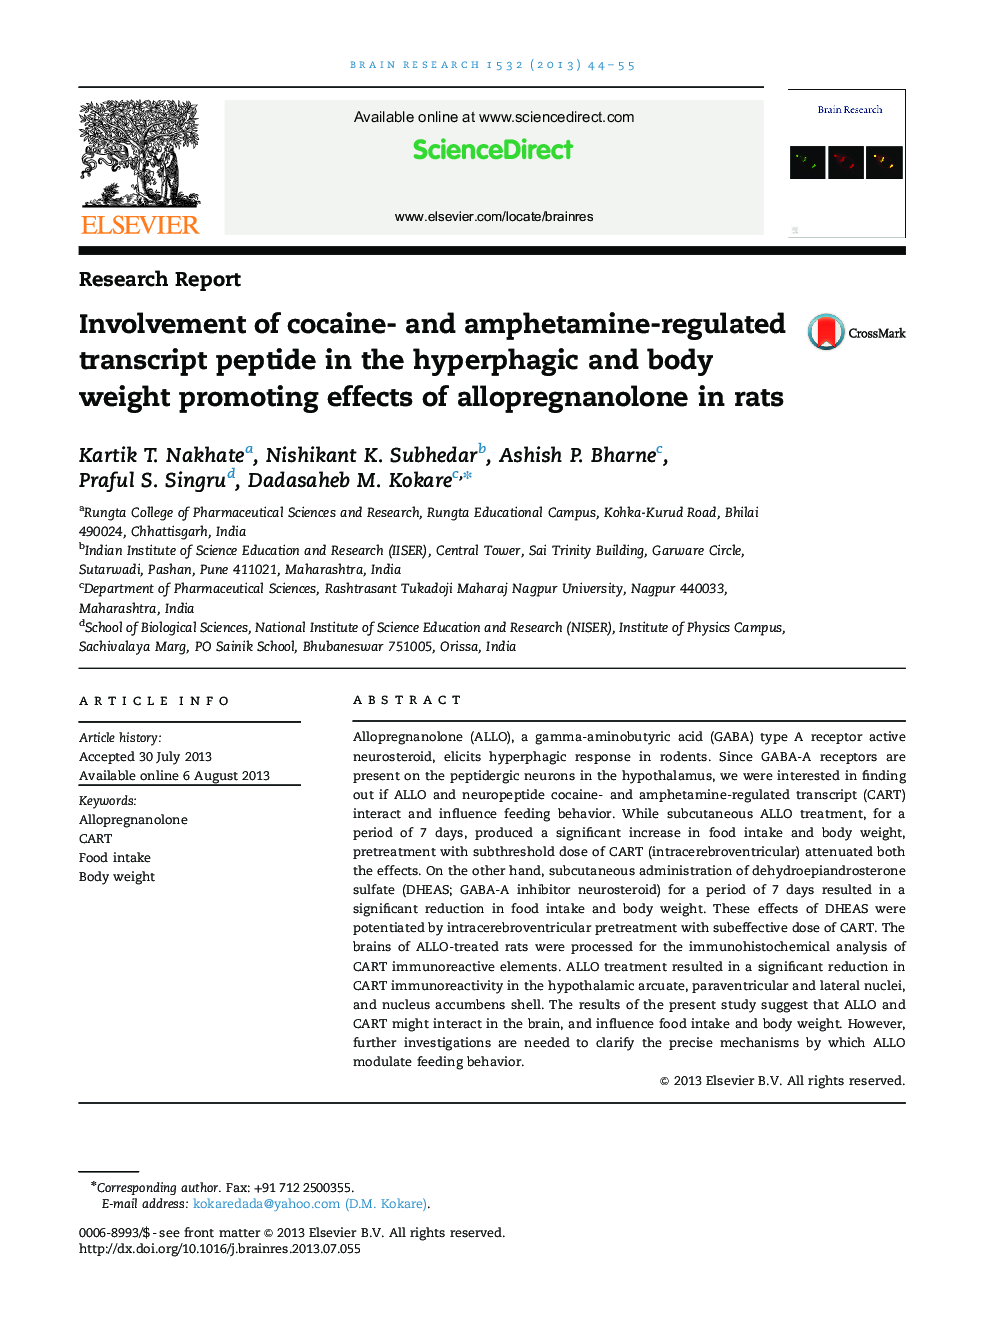 Research ReportInvolvement of cocaine- and amphetamine-regulated transcript peptide in the hyperphagic and body weight promoting effects of allopregnanolone in rats